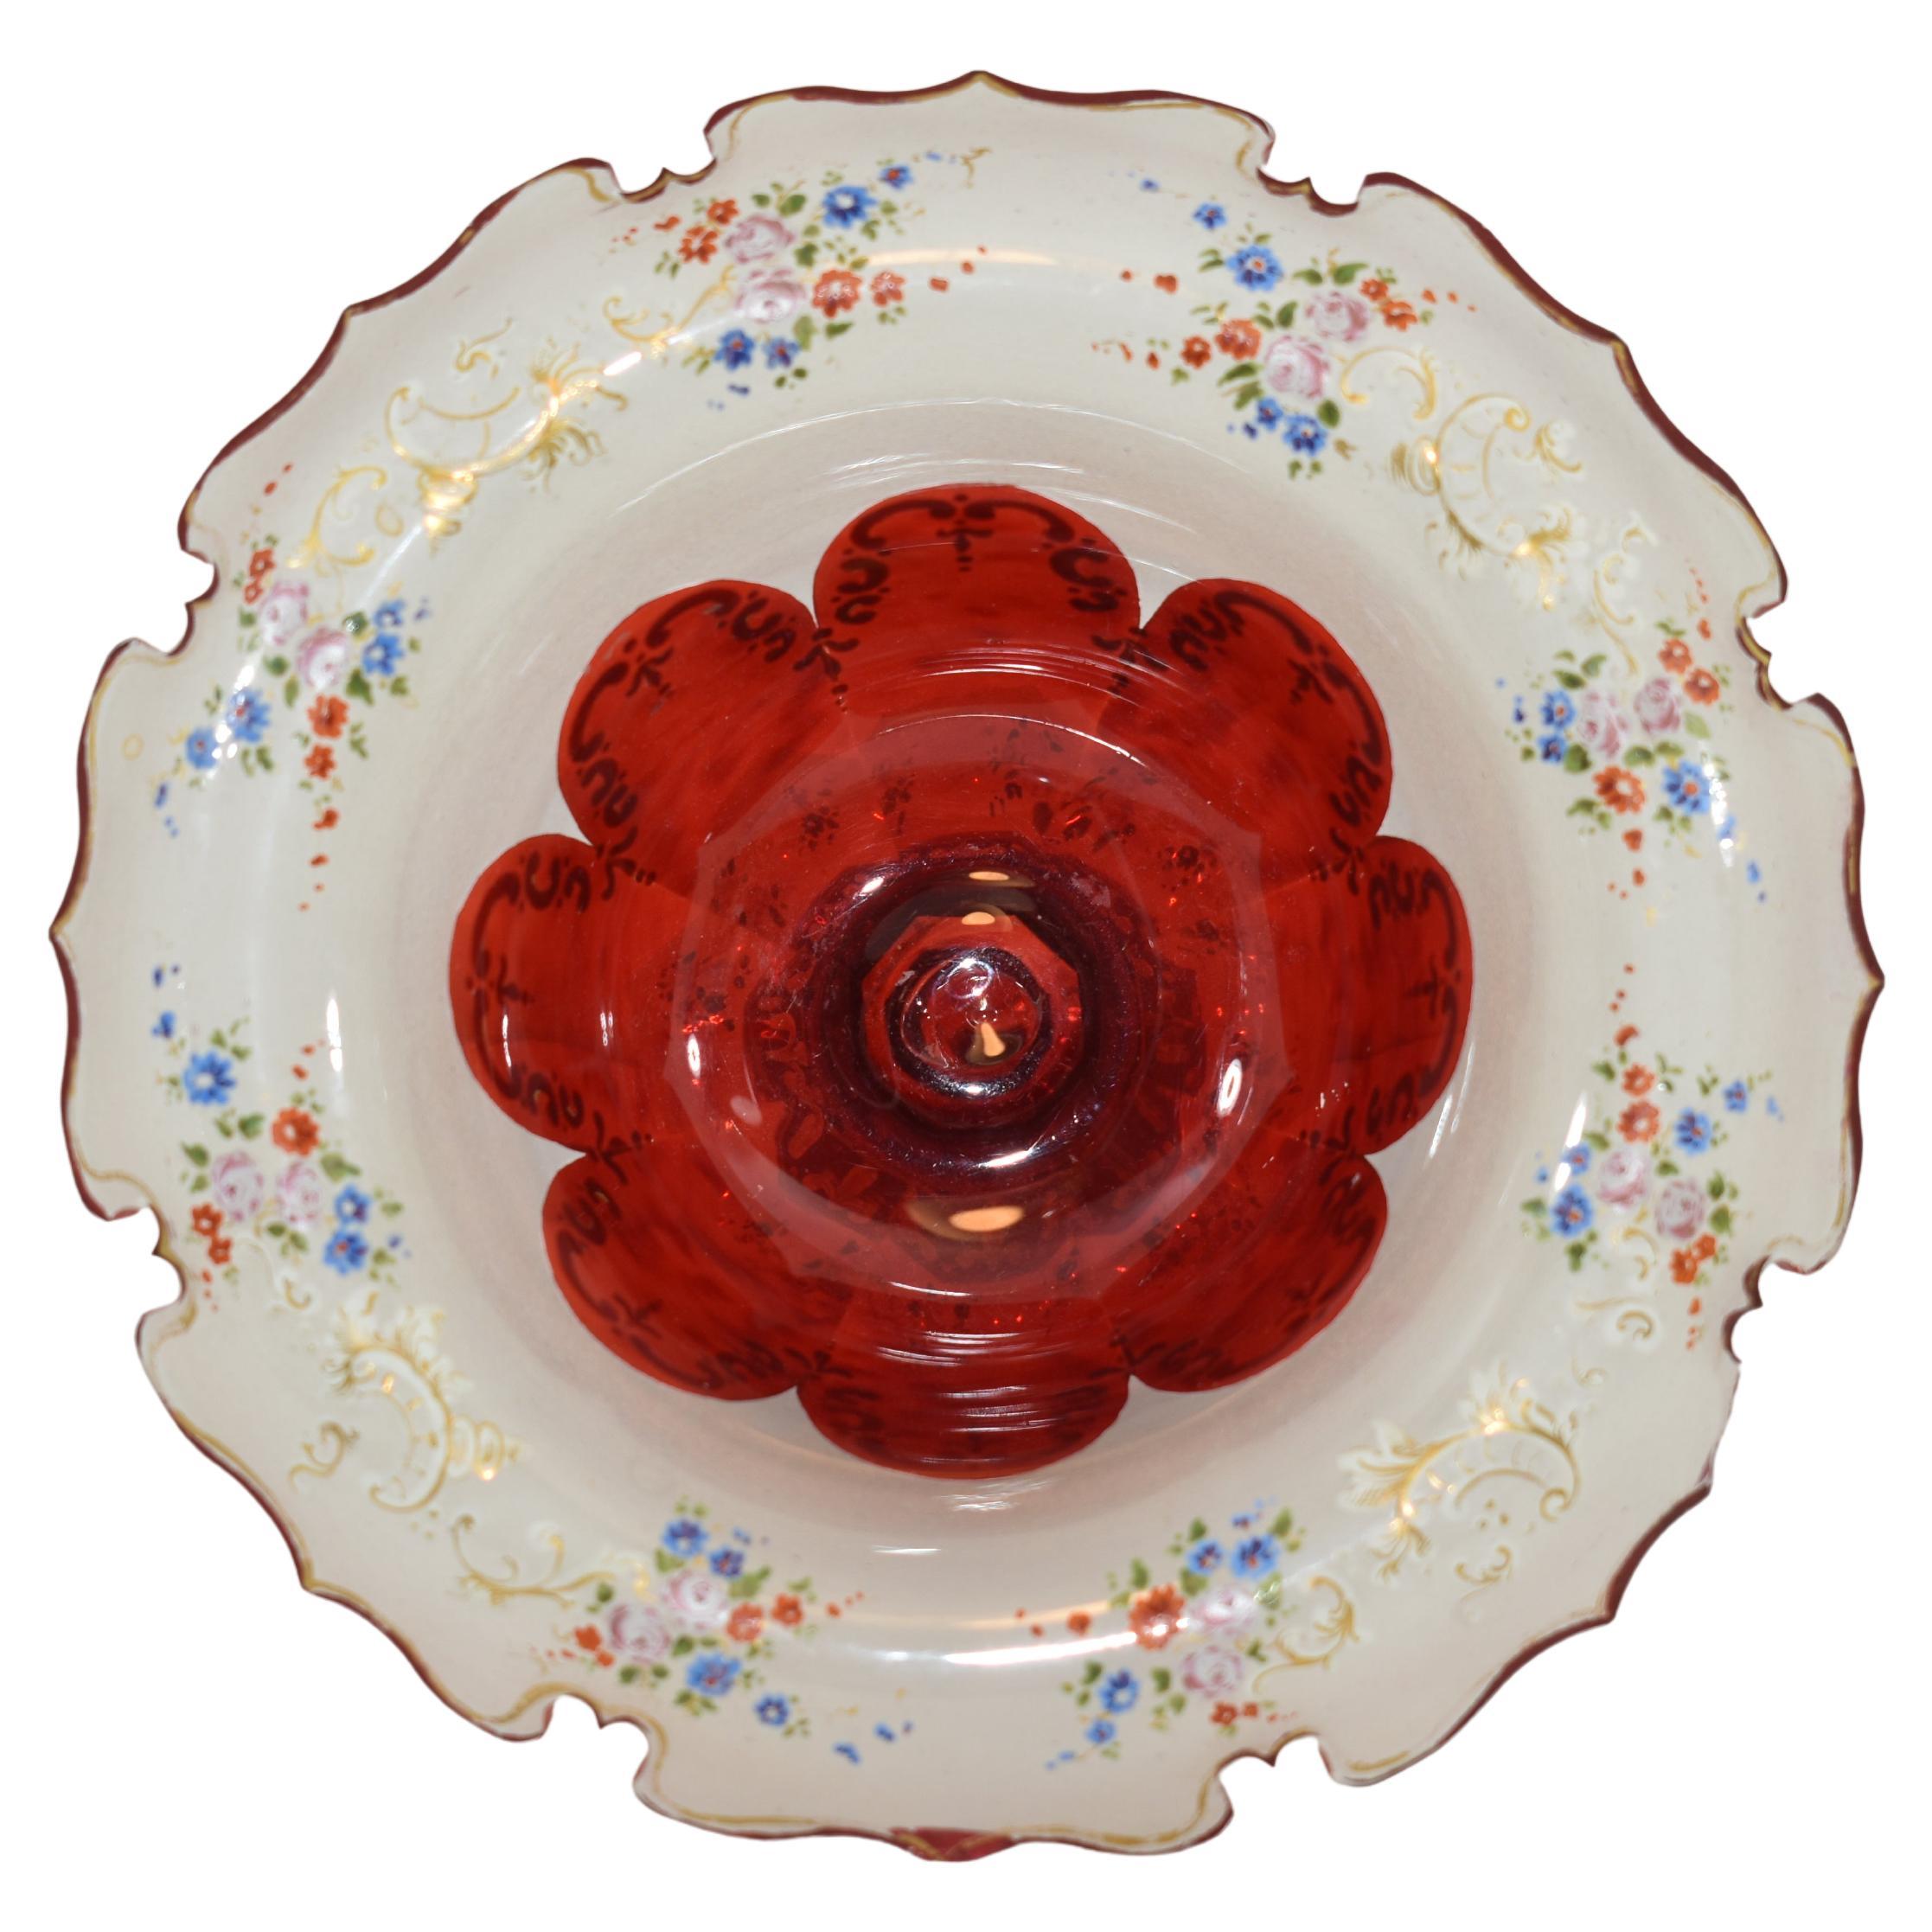 Antique Bohemian Ruby Red Enameled Glass Tazza Bowl, 19th Century In Good Condition For Sale In Rostock, MV